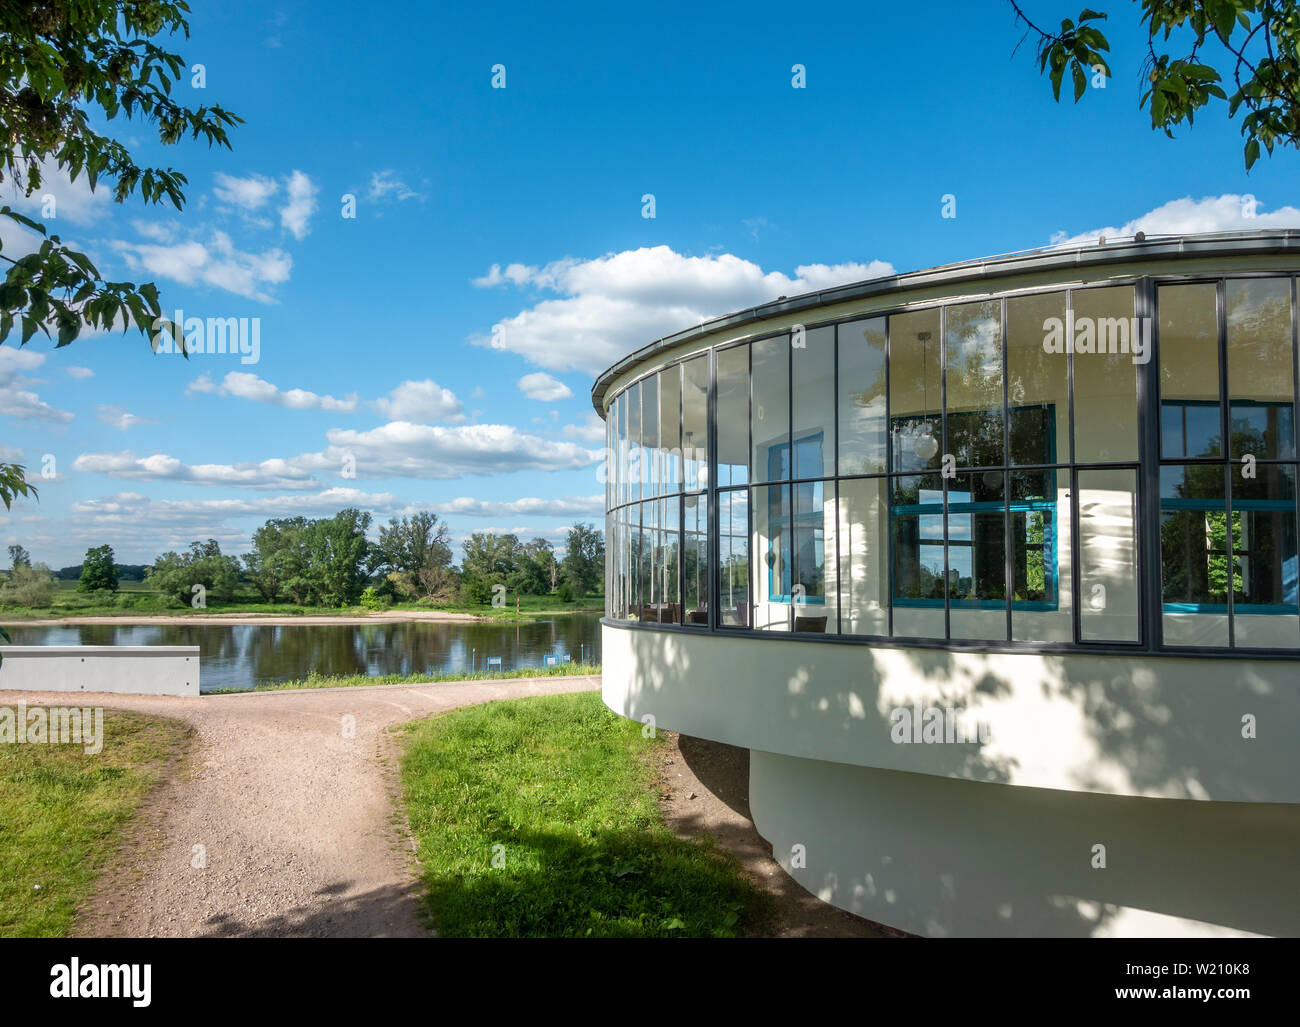 Kornhaus Restaurant on the banks of the Elbe river in Dessau designed in 1929 by architect Carl Fieger who was a teacher at the Bauhaus. Stock Photo